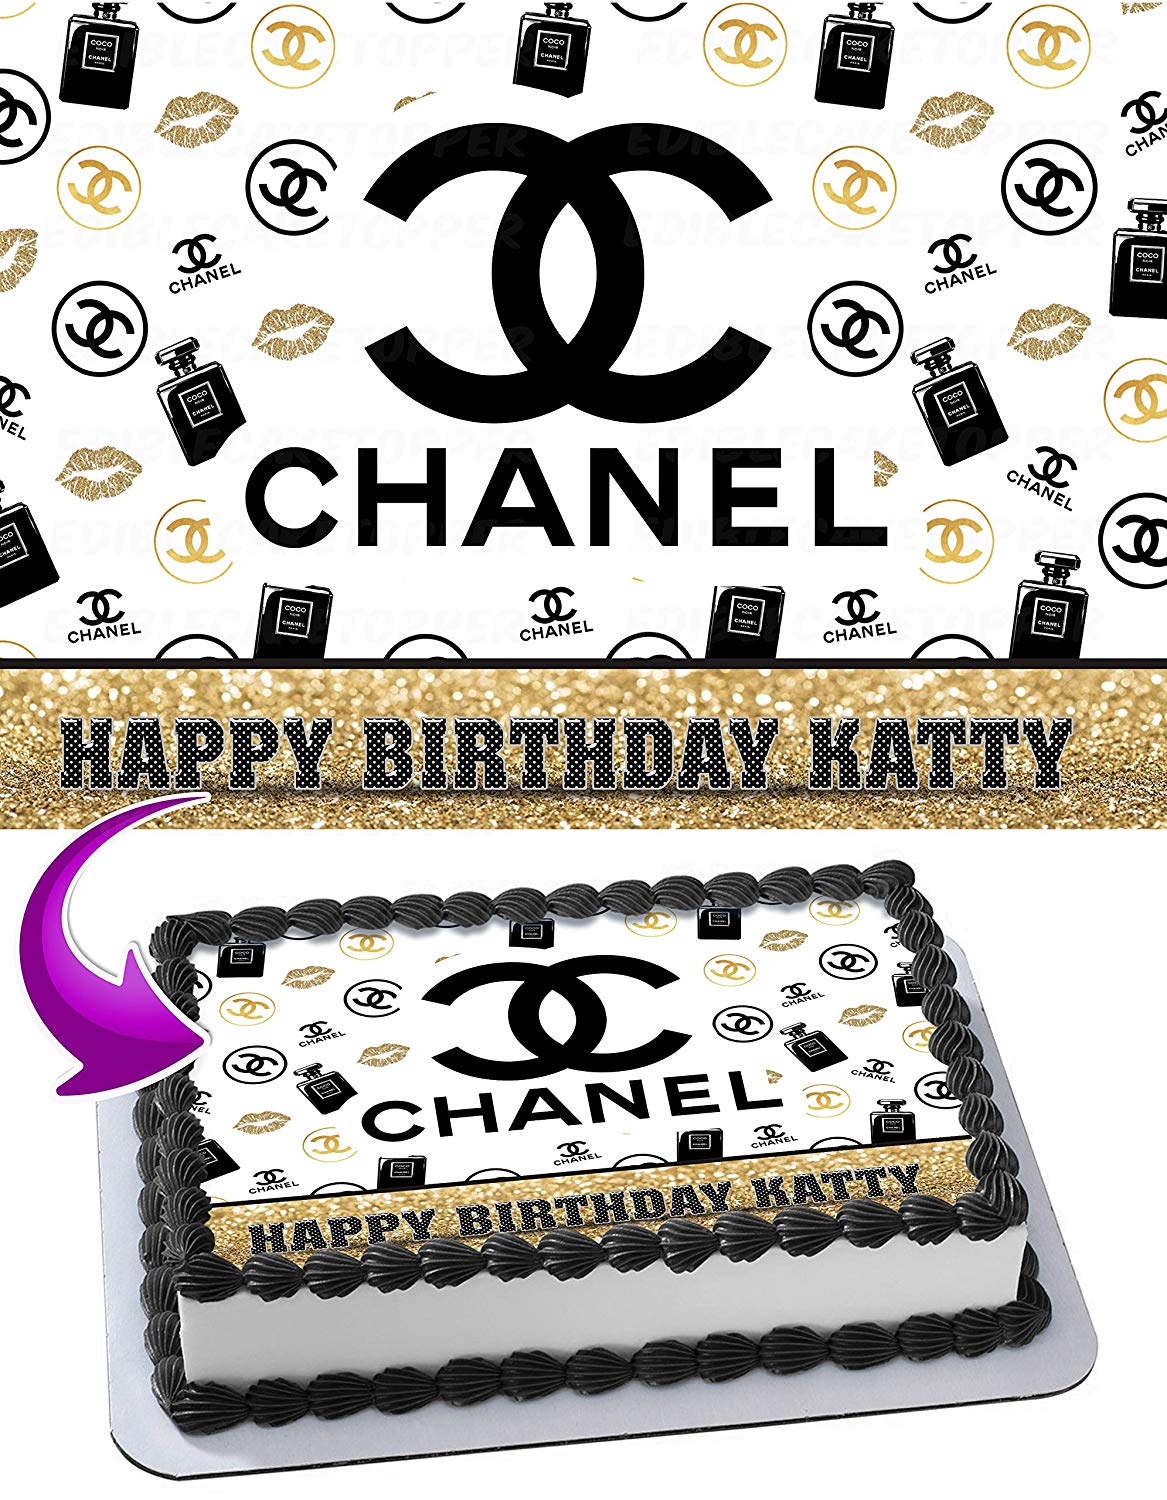 Chanel Edible Image Cake Topper Personalized Birthday Sheet Decoration  Custom Party Frosting Transfer Fondant